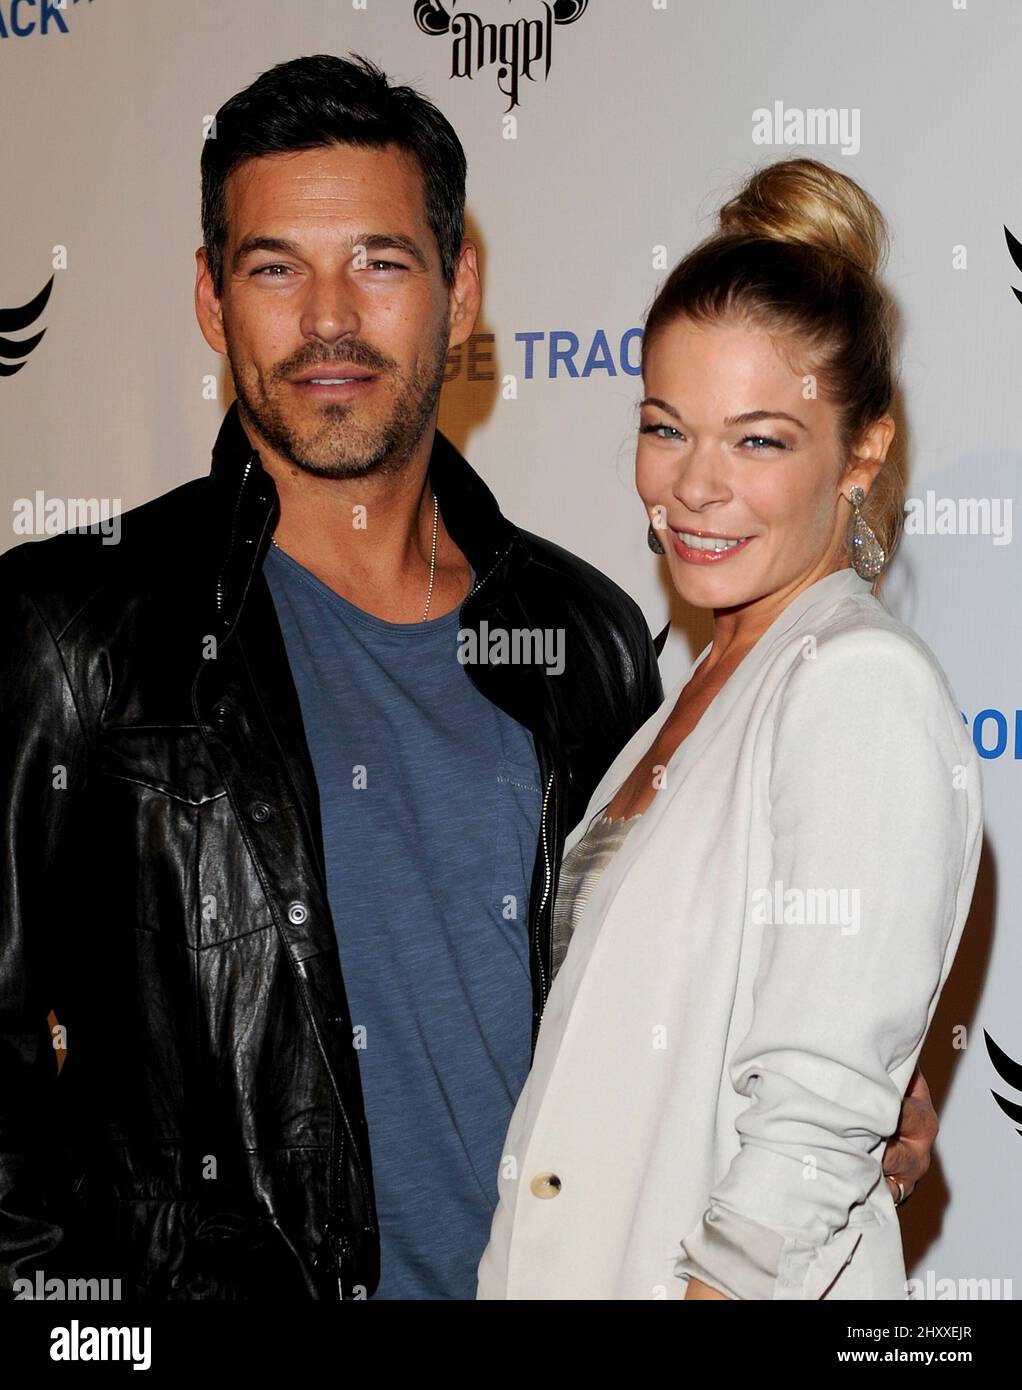 Eddie Cibrian and LeAnn Rimes at the 2012 TRANS4M i.am.angel Grammy Event held at the Palladium in Hollywood, Ca. Stock Photo